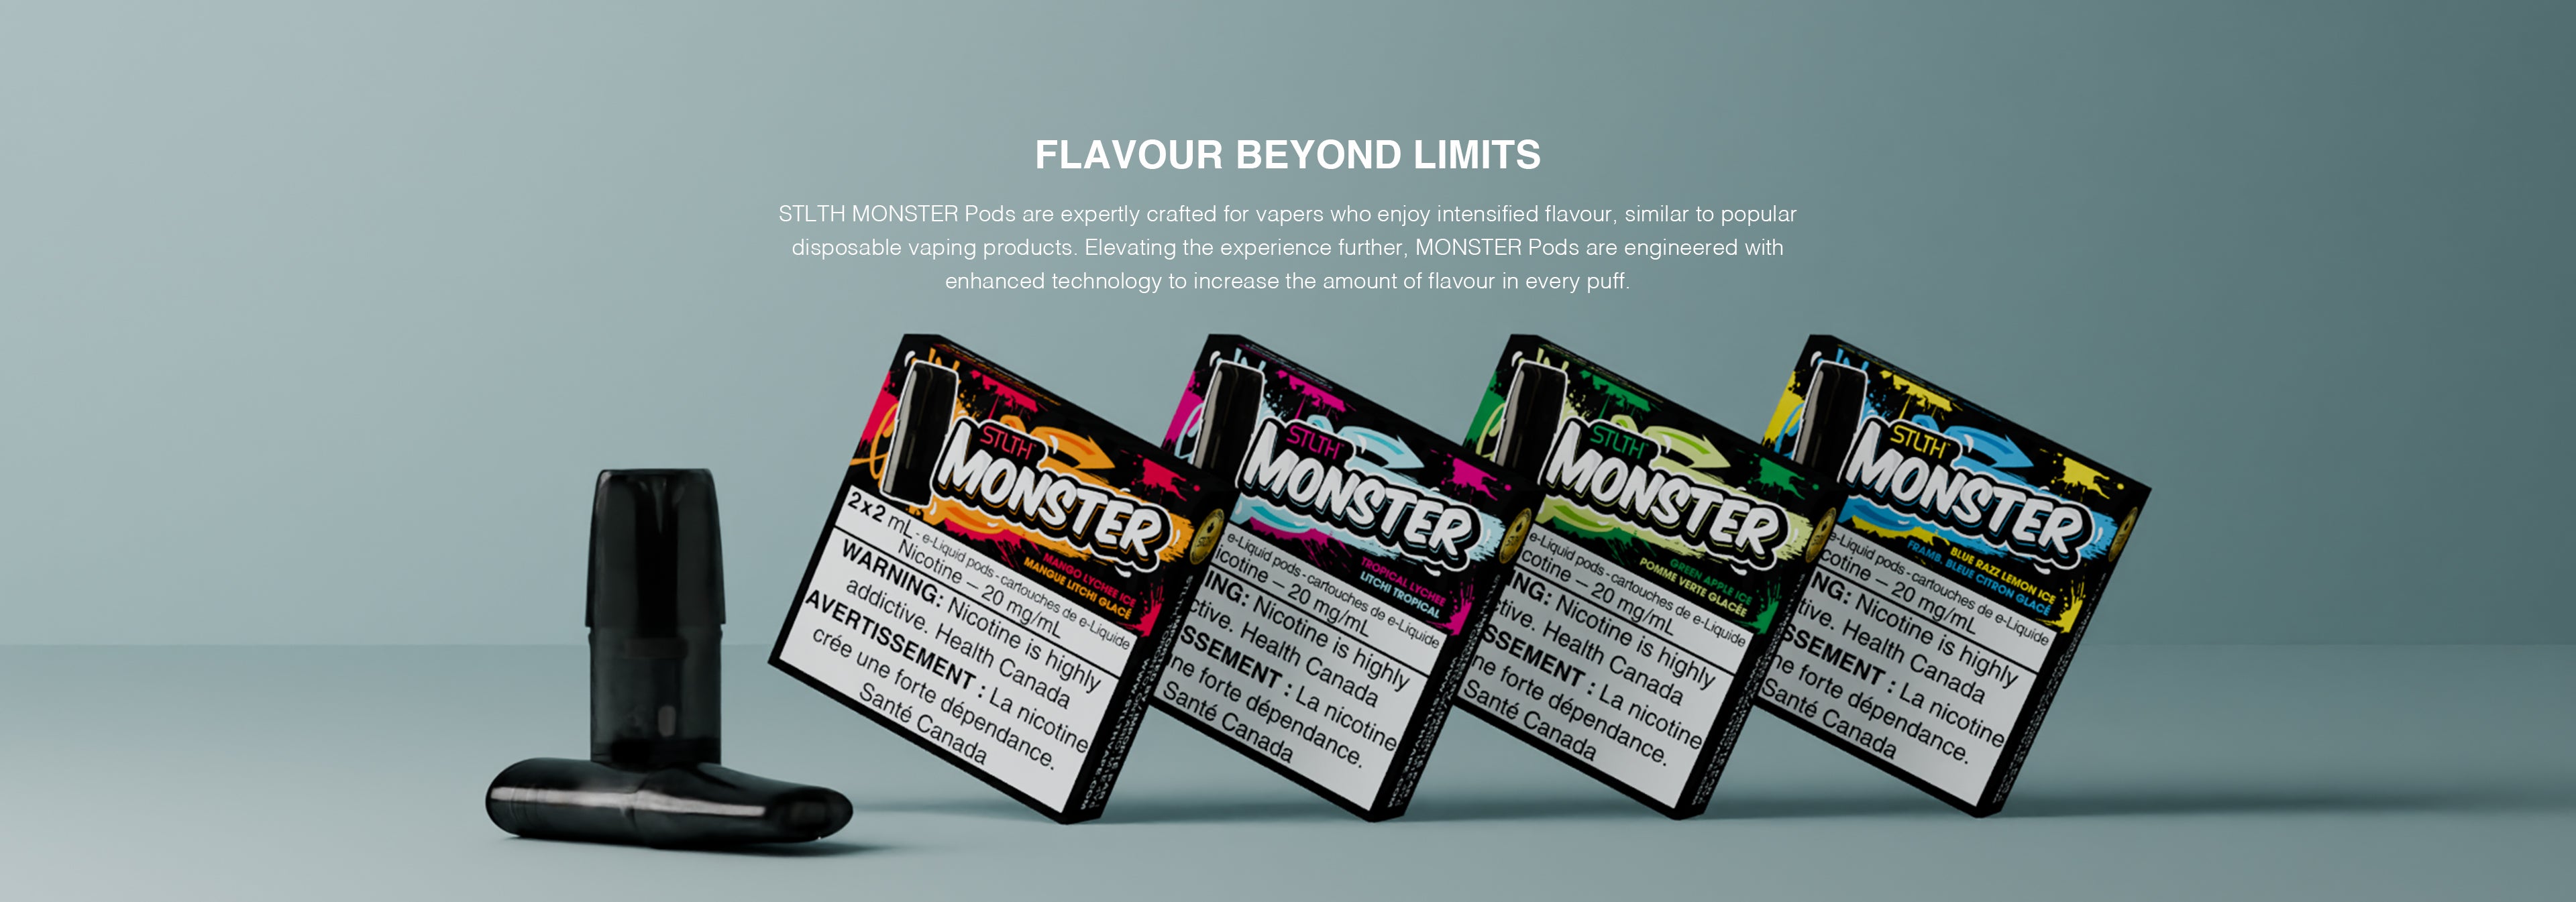 FLAVOUR BEYOND LIMITS: STLTH MONSTER Pods are expertly crafted for vapers who enjoy intensified flavour, similar to popular disposable vaping products. Elevating the experience further, MONSTER Pods are engineered with enhanced technology to increase the amountof flavour in every puff.